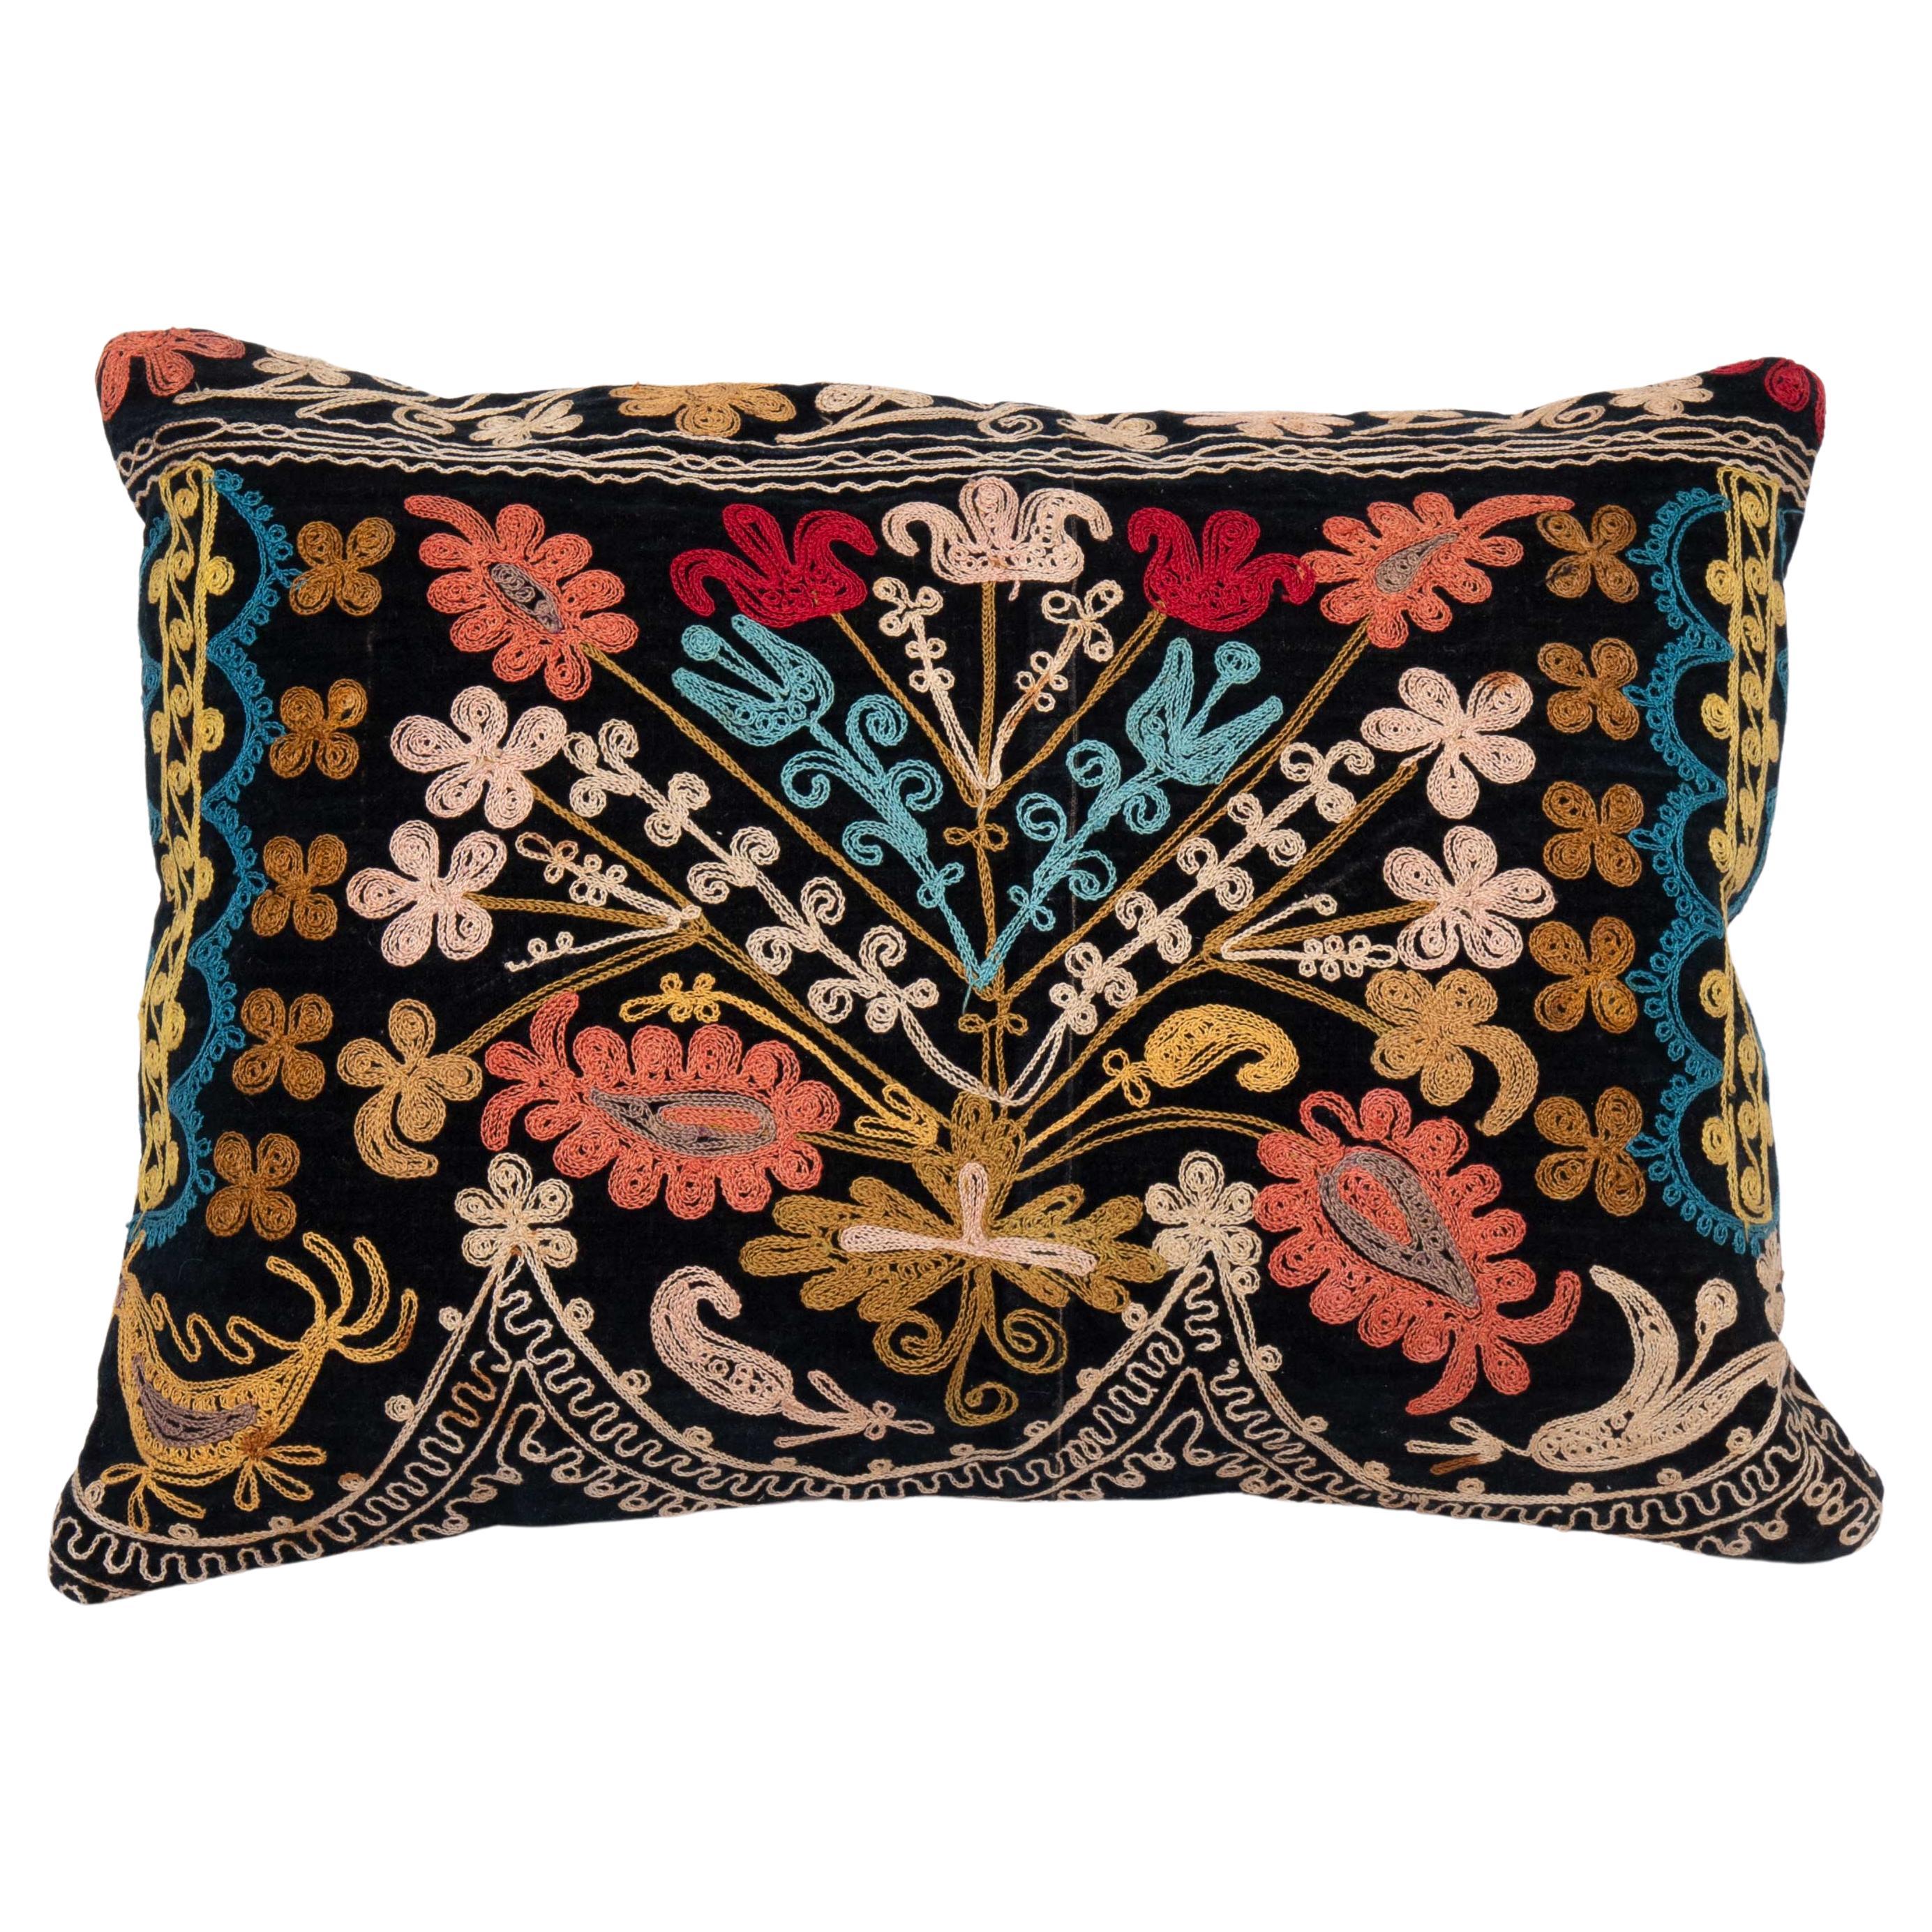 Suzani Pillow Cover Made from a Vintage Velvet Suzani